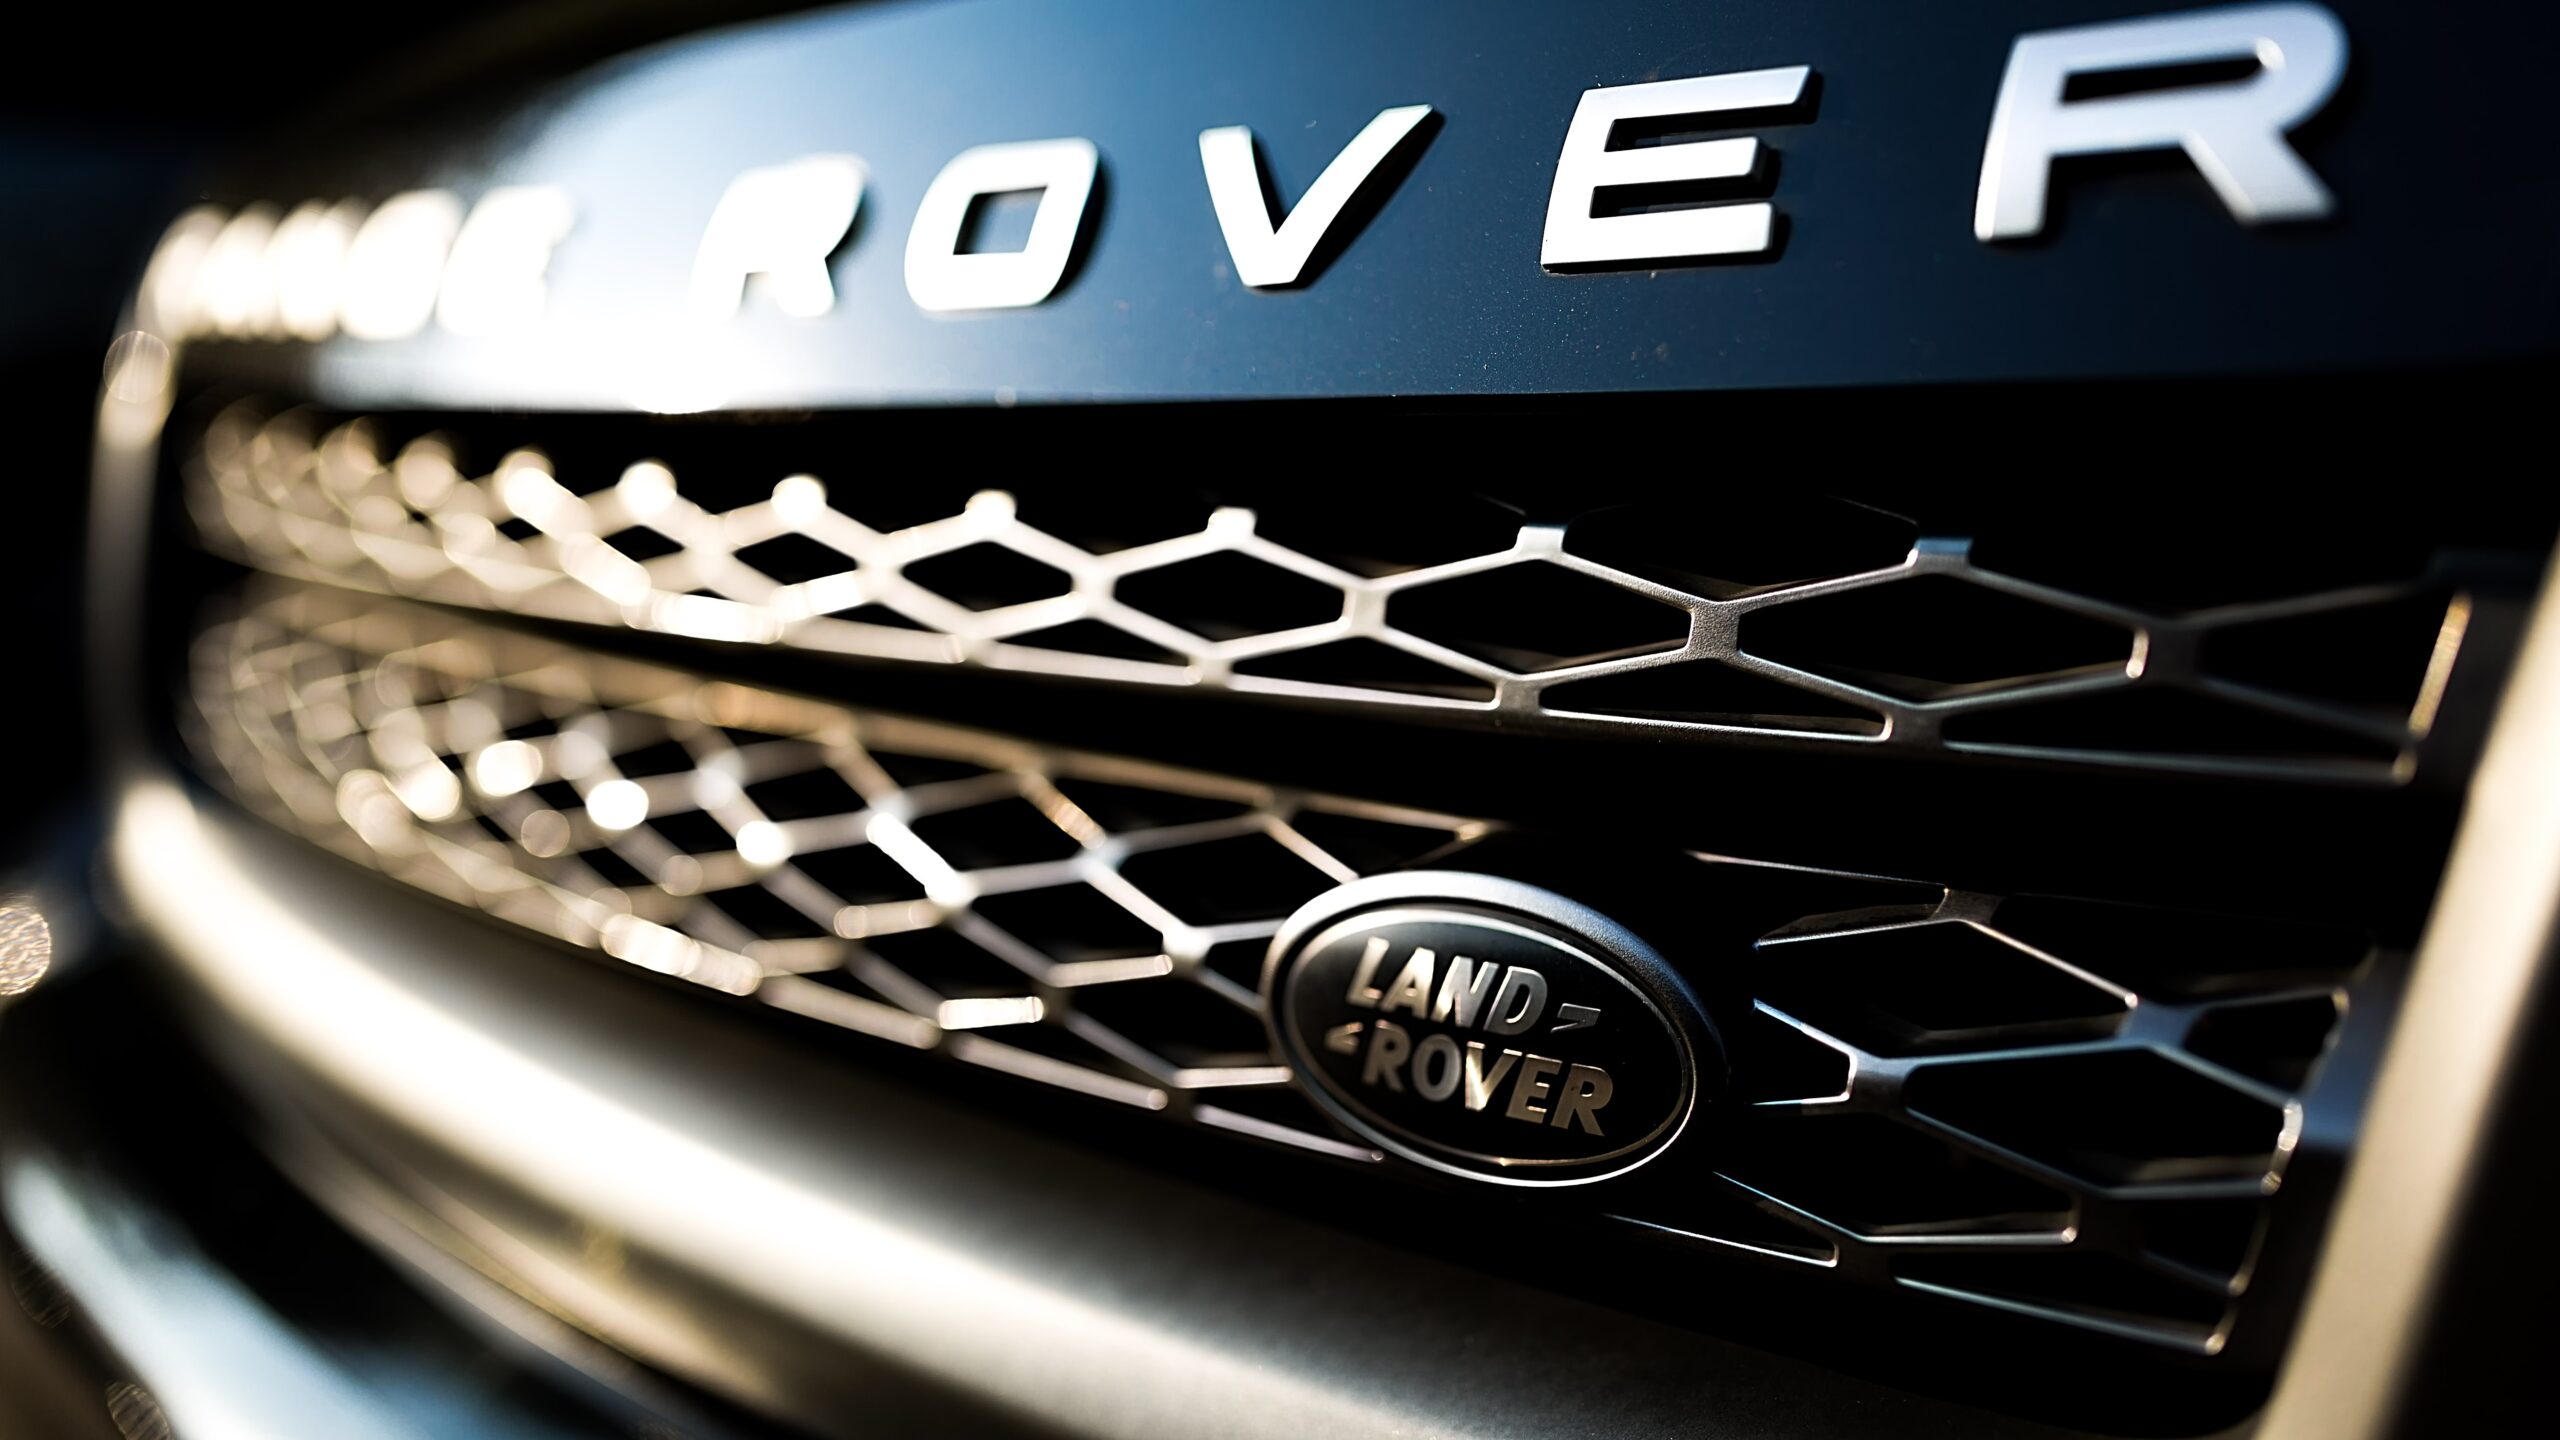 What is the difference between Land Rover and Range Rover?